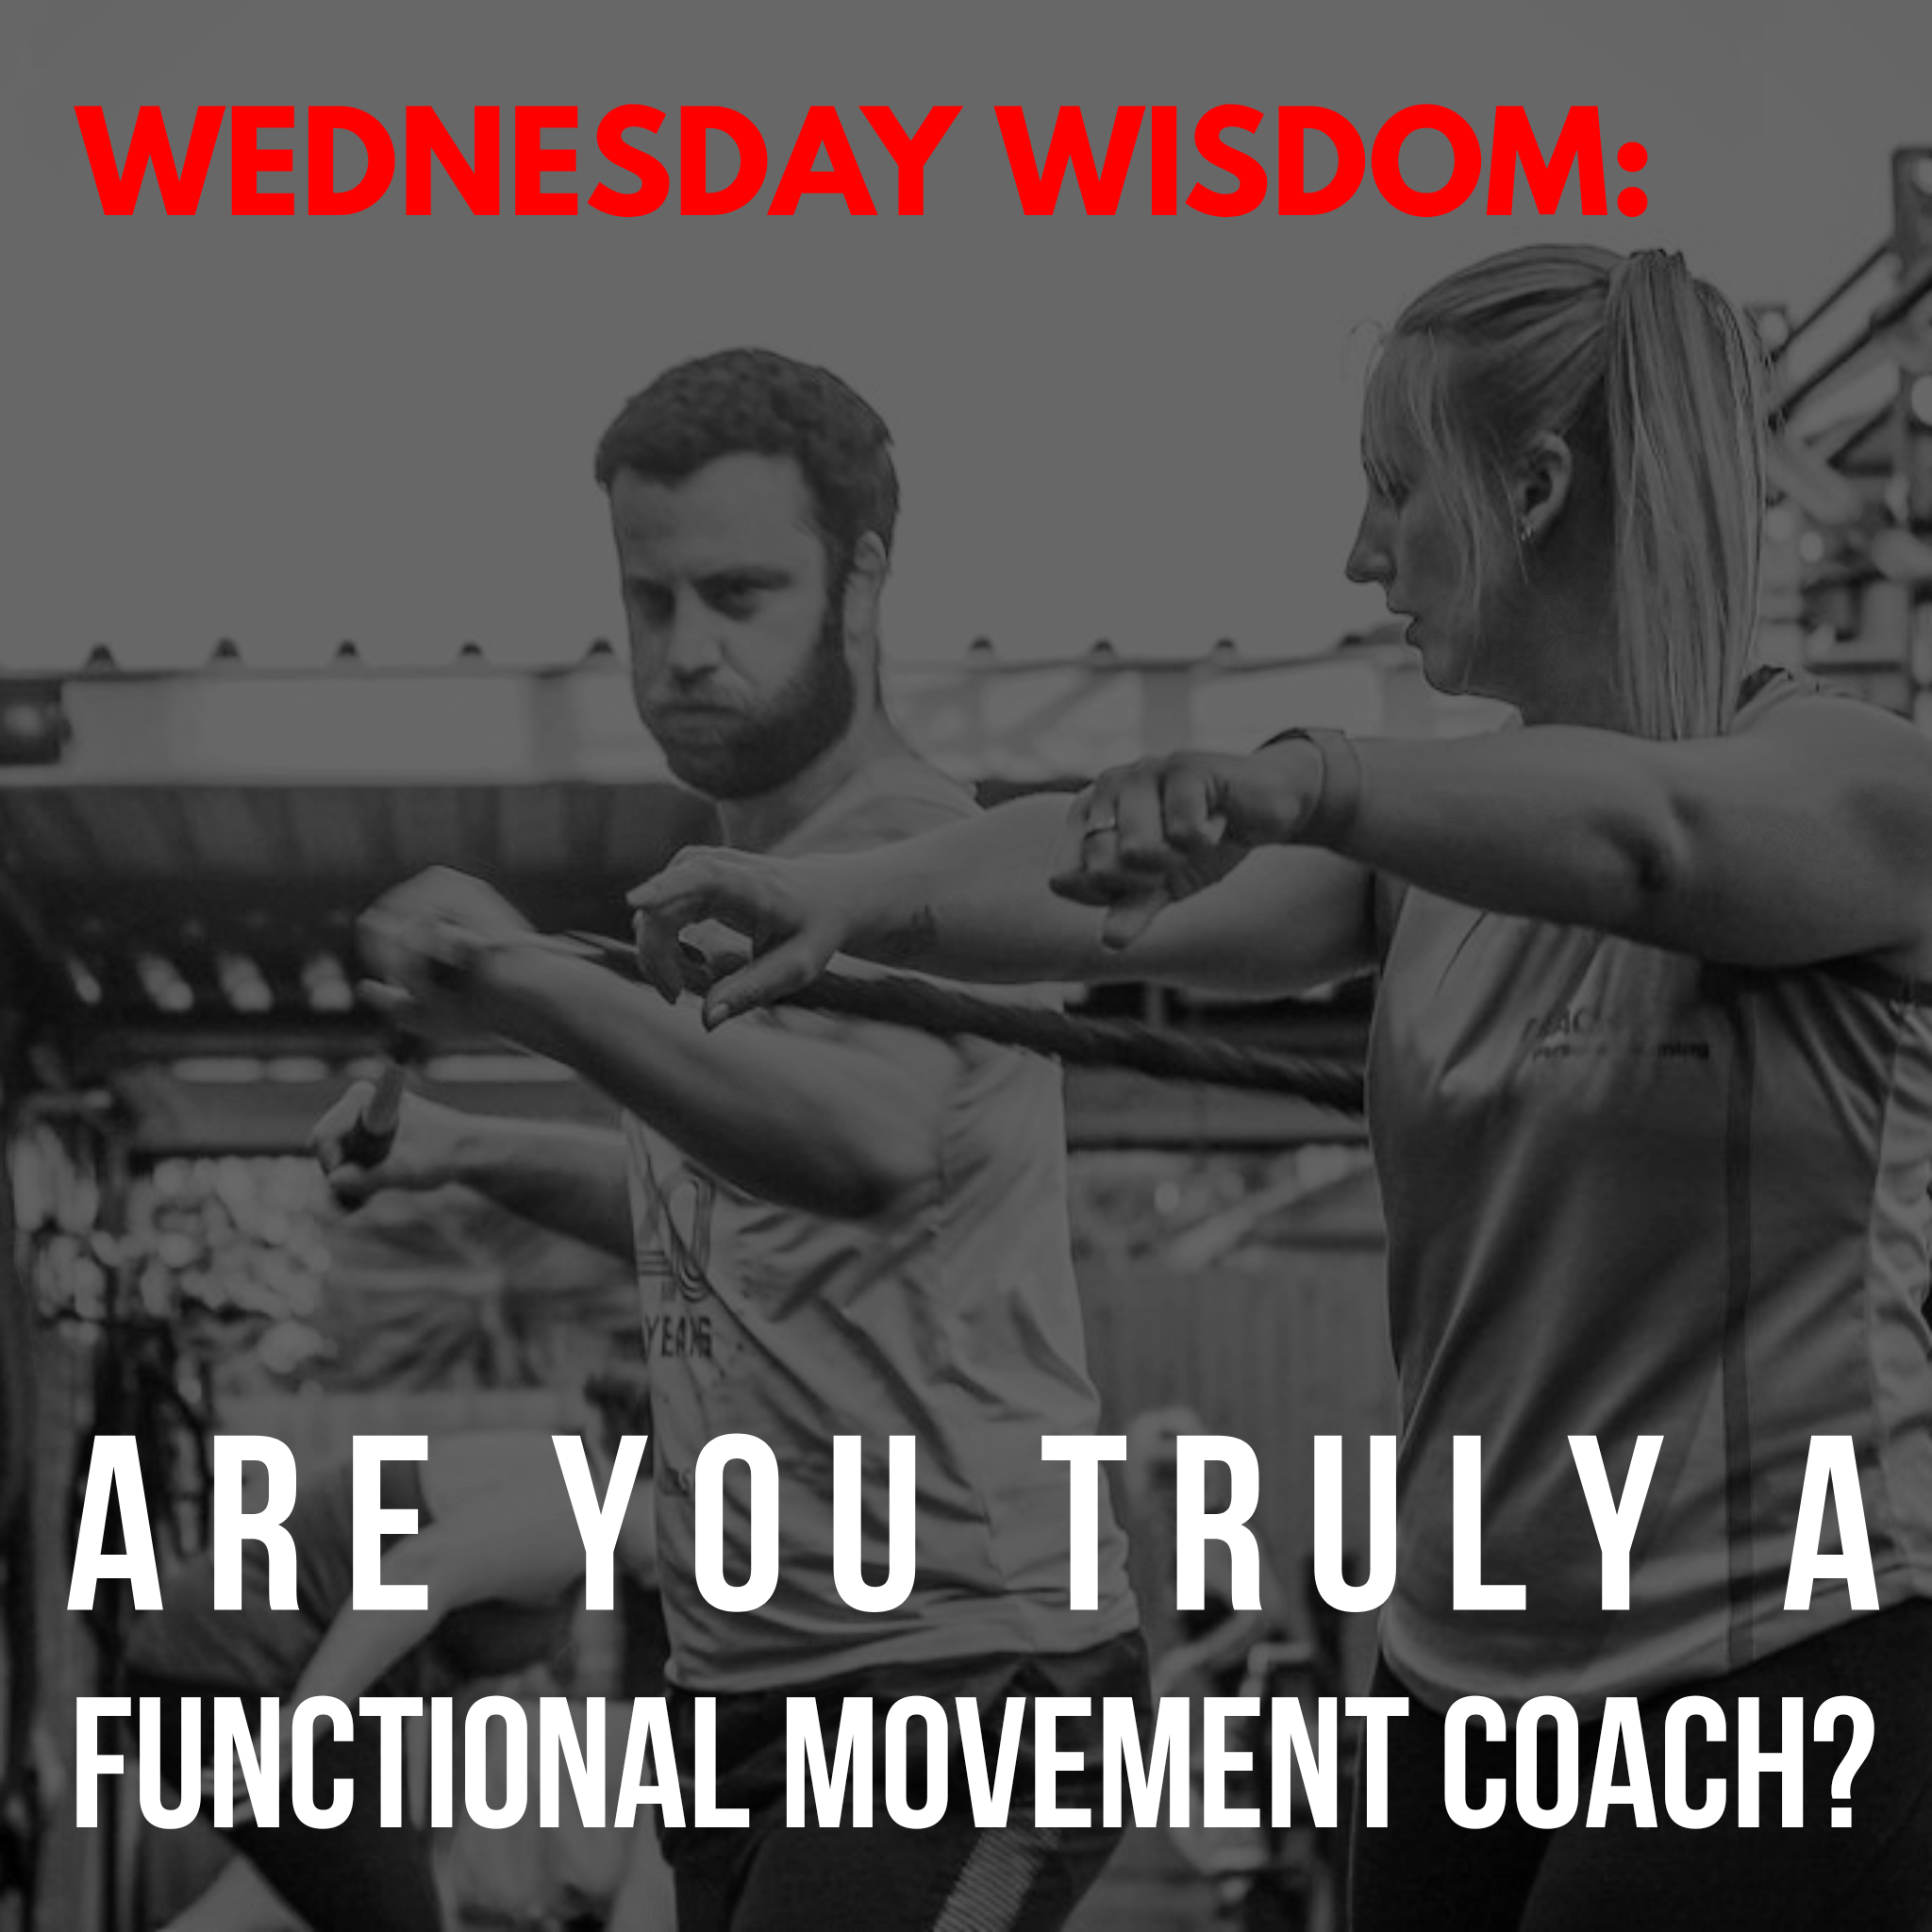 WEDNESDAY WISDOM: Are You Truly A Functional Movement Coach?